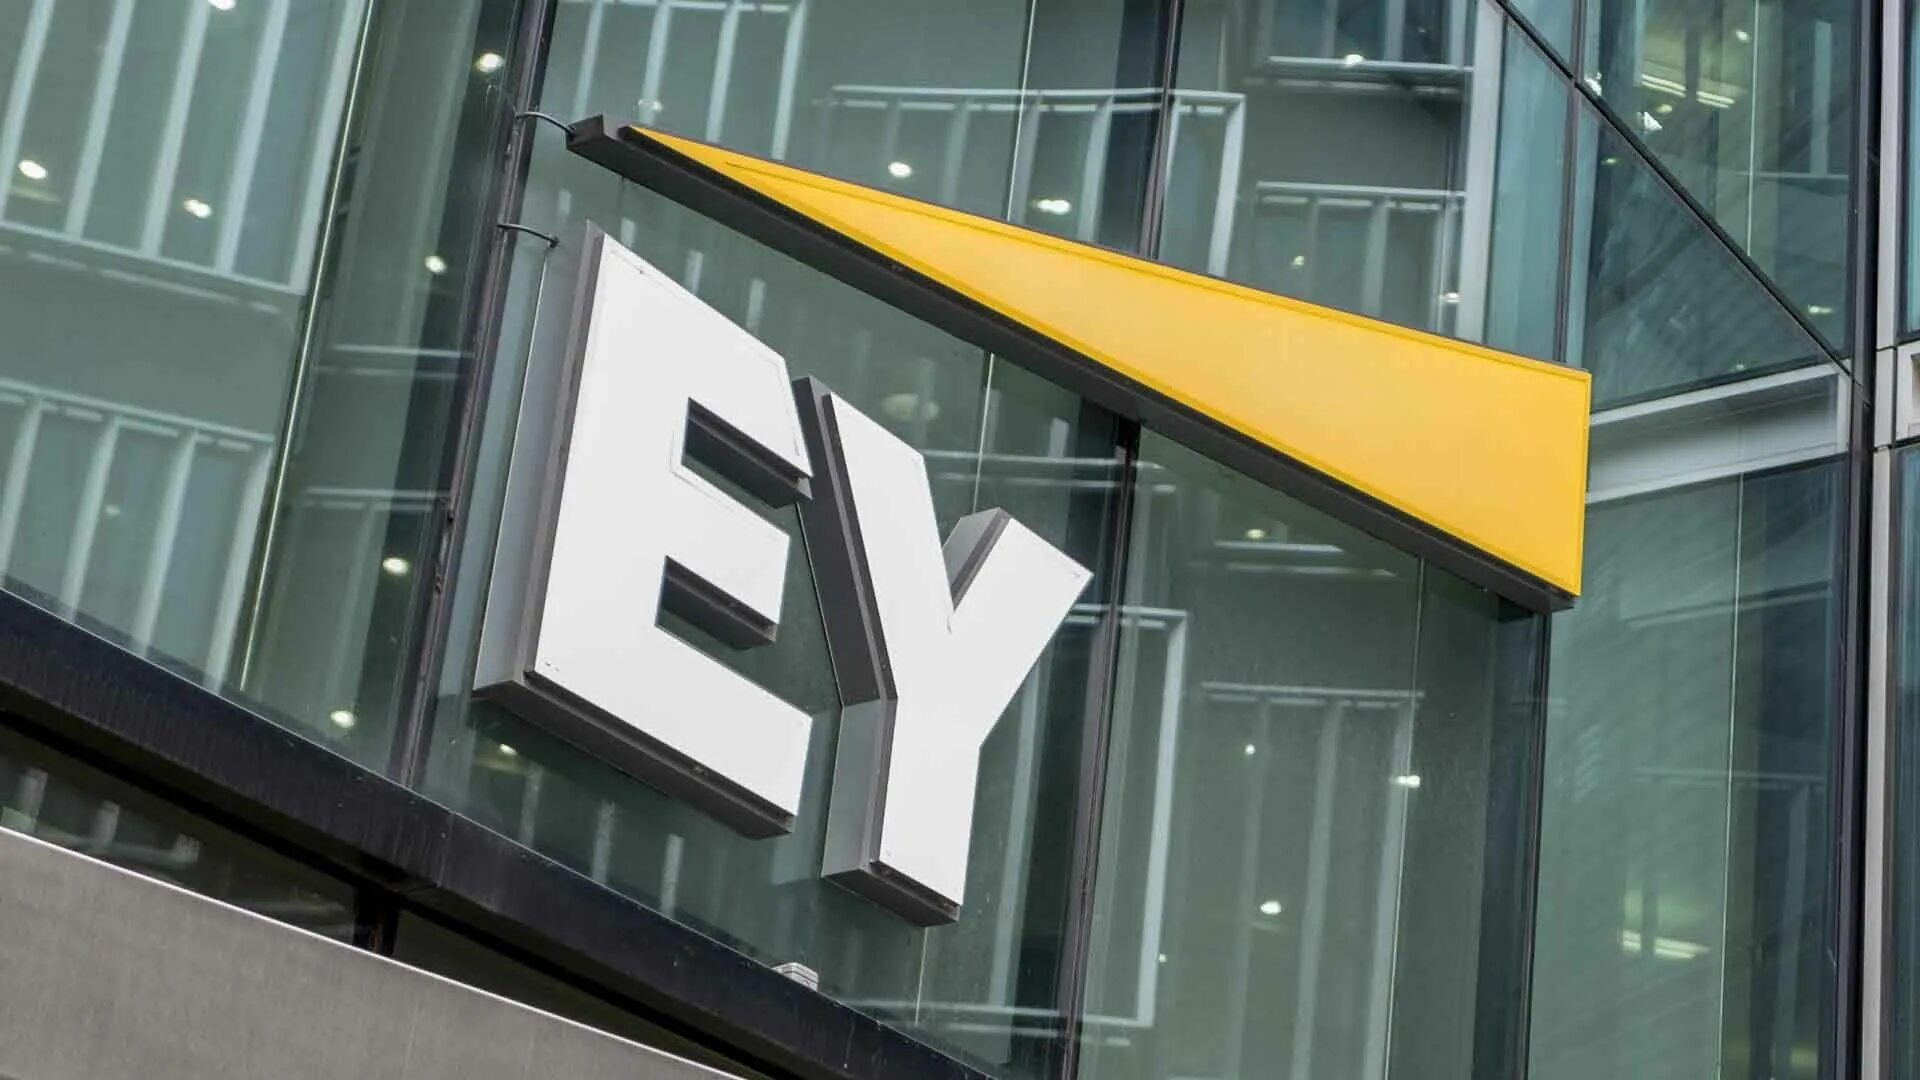 Ernst & young (Ey). Ernst and young Россия. Ernst & young штаб квартира. Ey Новосибирск.